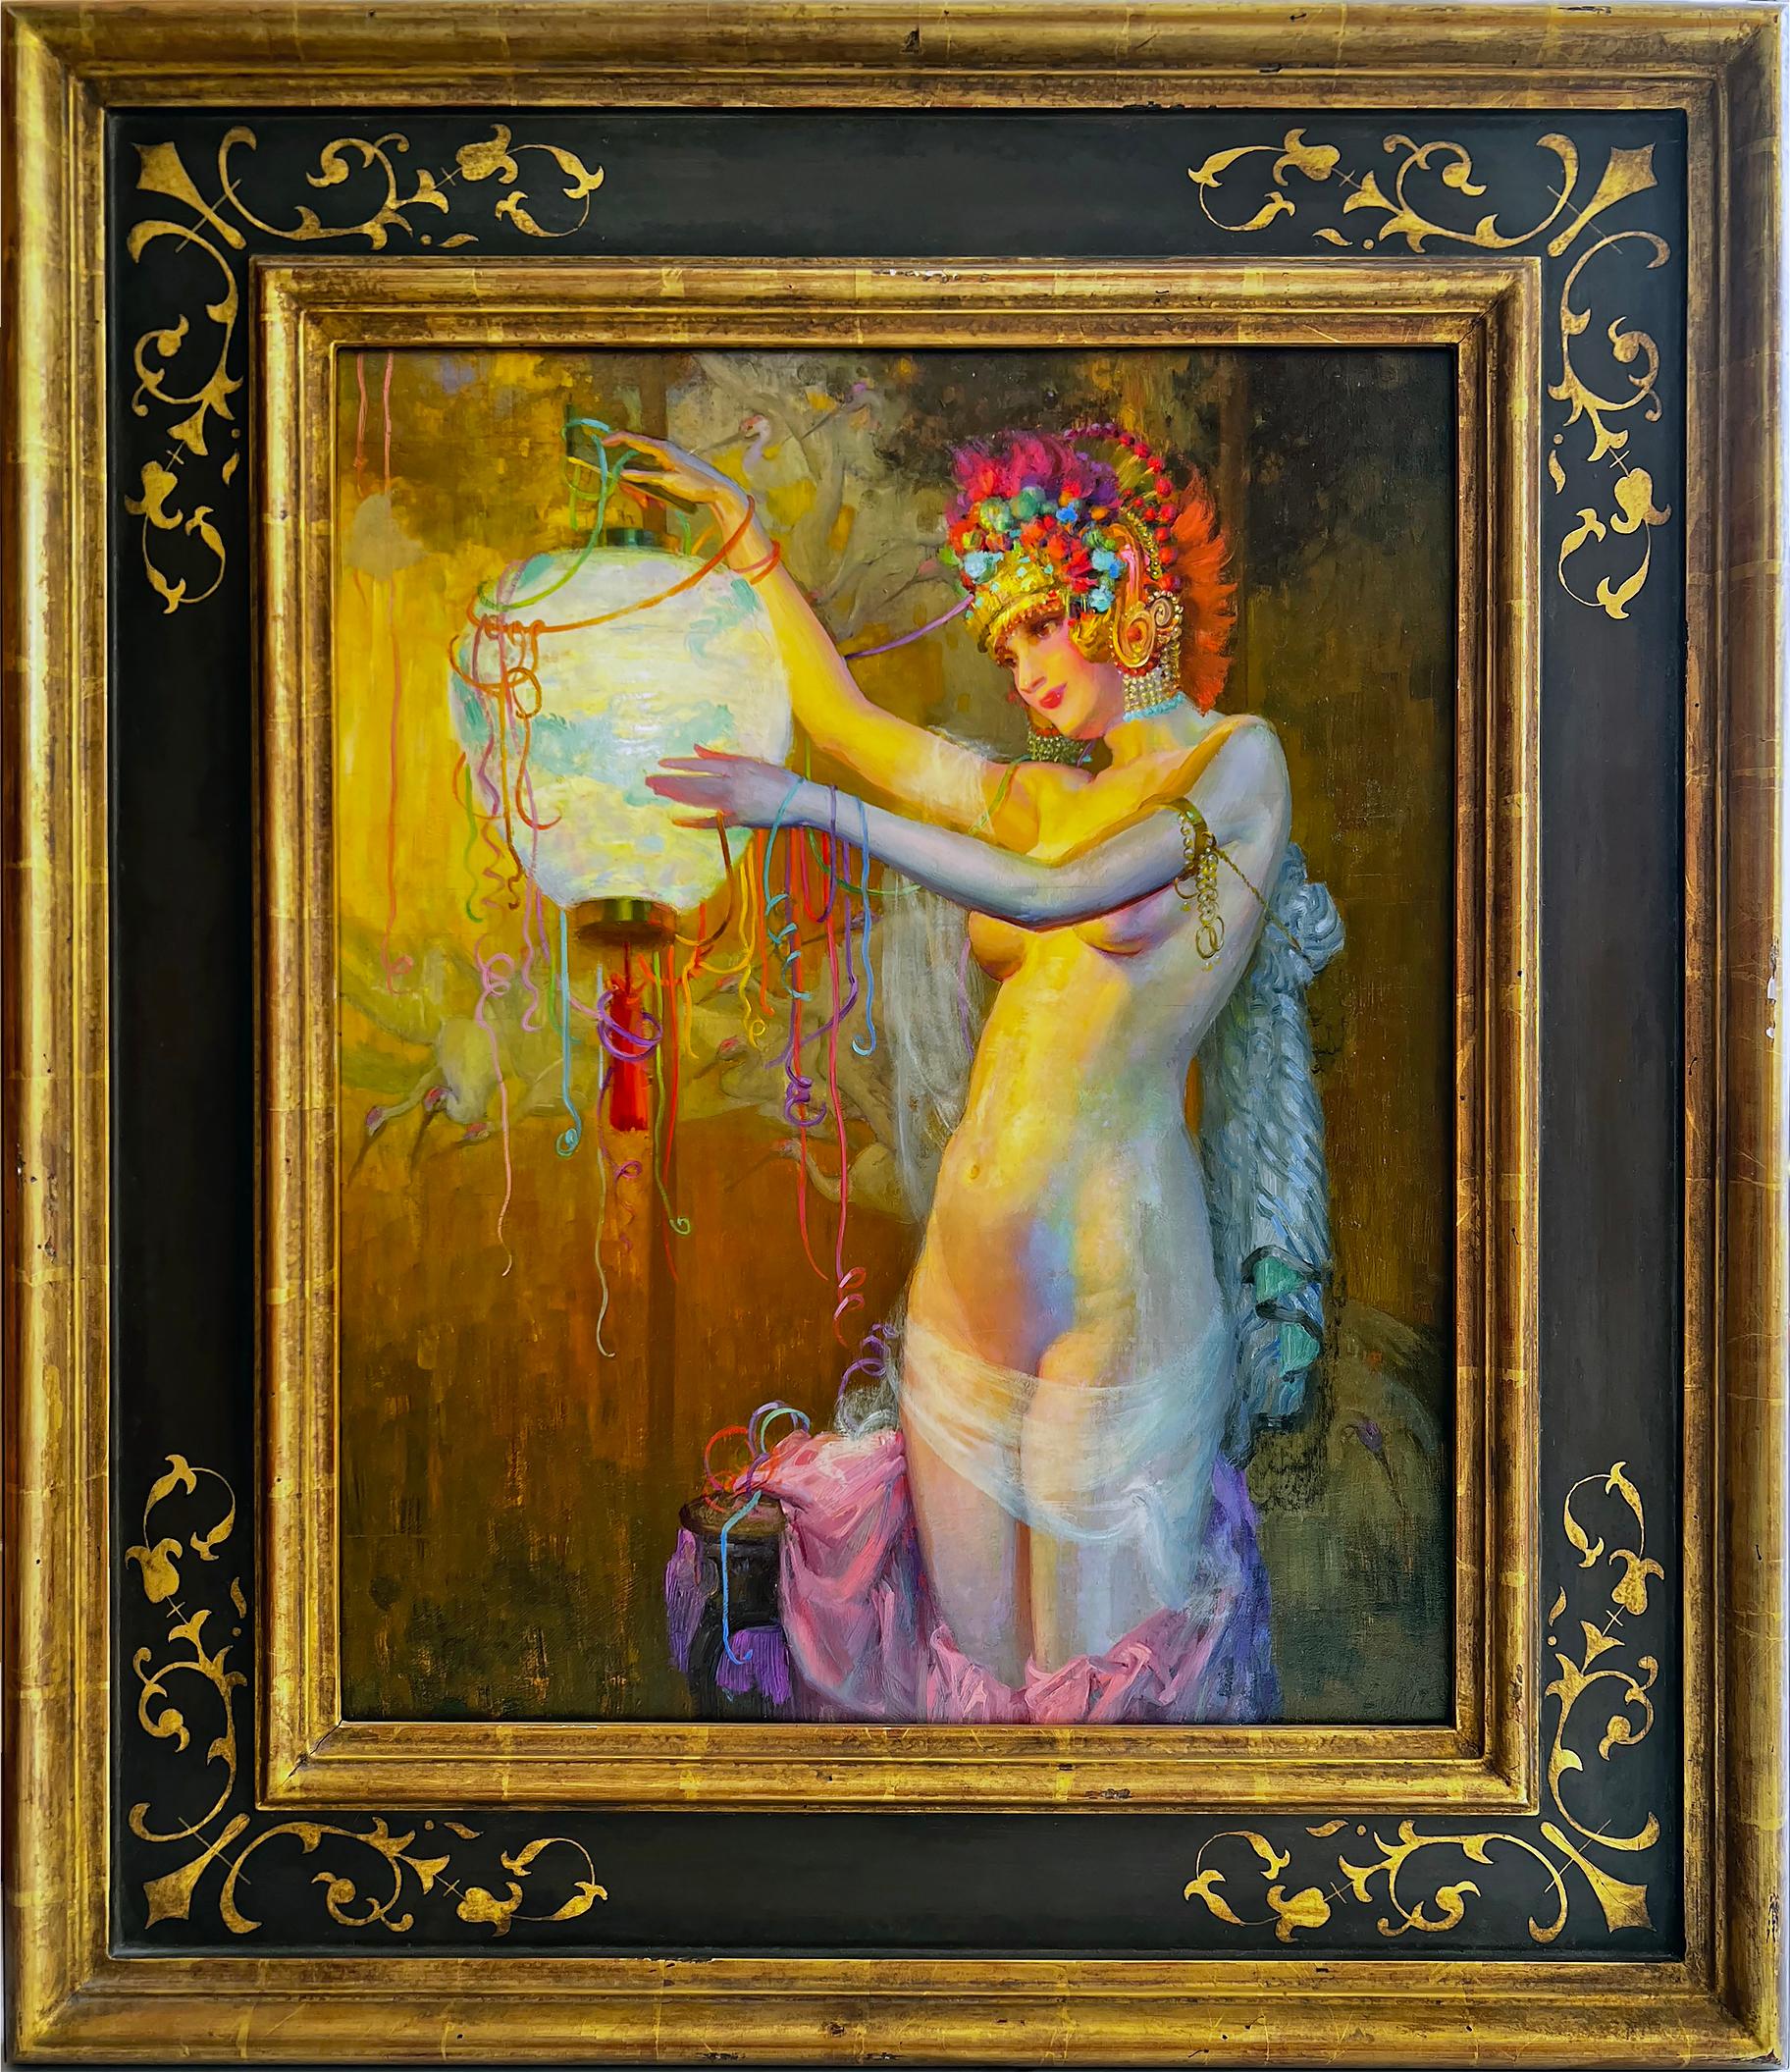 A stunning, beautiful nude dancer exhibiting ideal proportions and crowned with an ornate floral headdress holds a luminescent Japanese Lantern. The lantern glows, and the dancer glows back in this light-infused painting. The background shows a